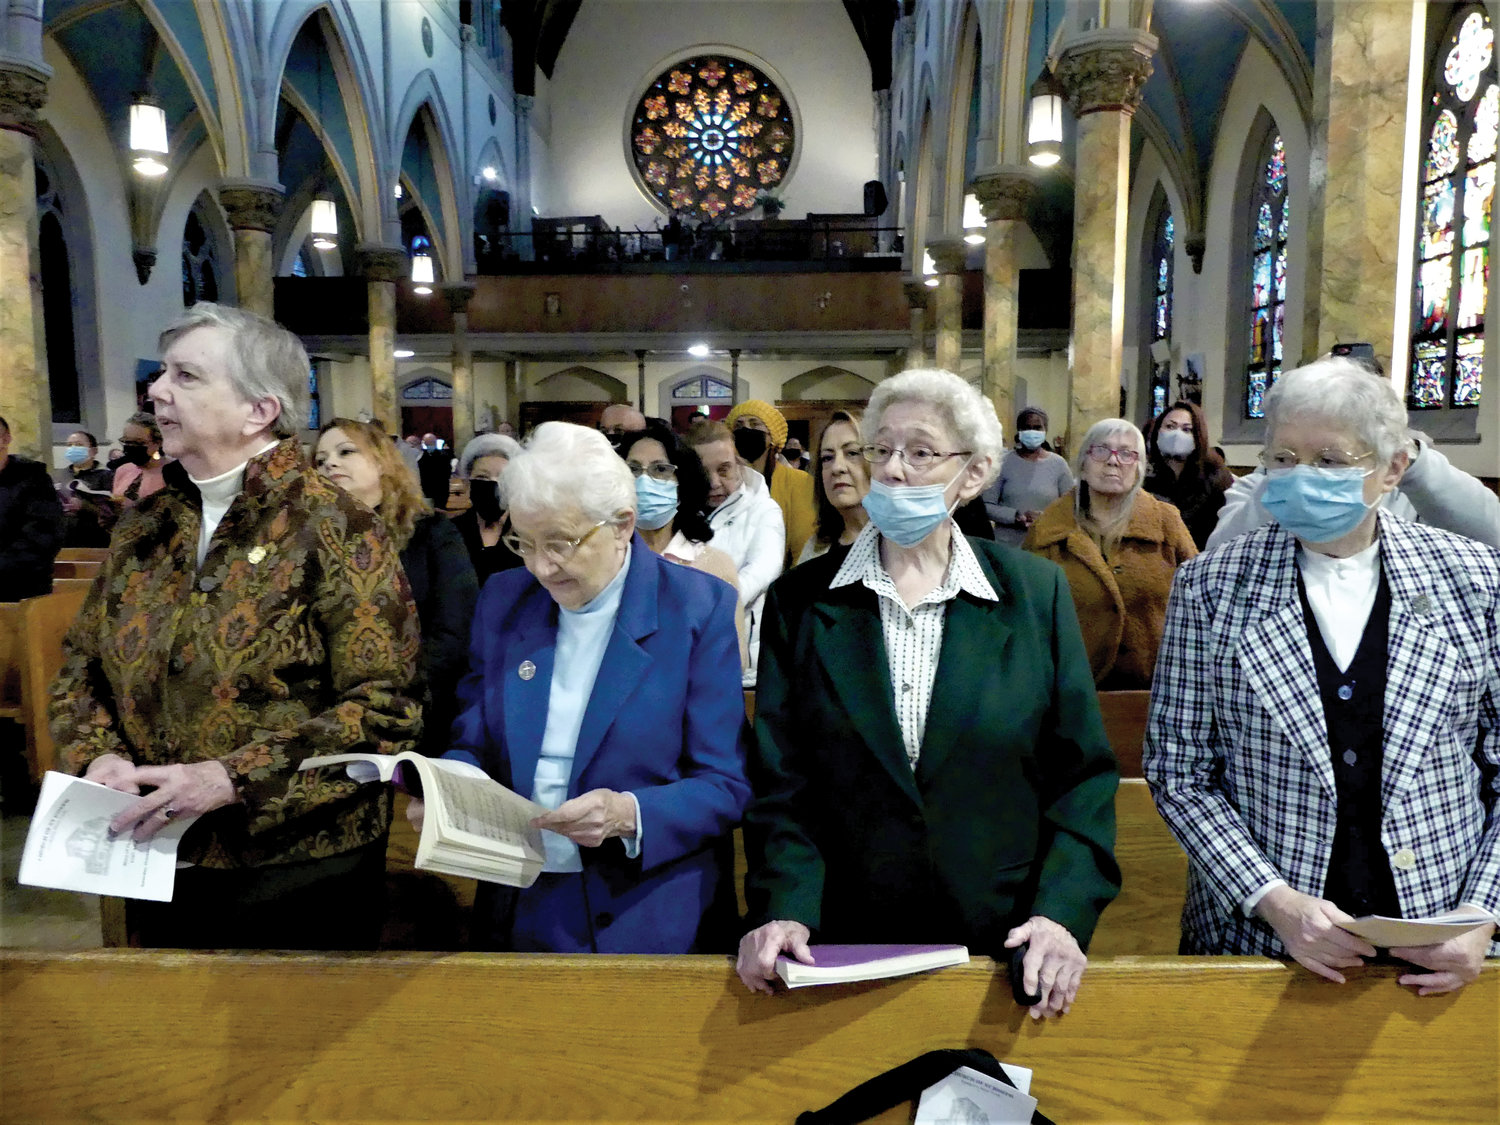 Members of the Sisters of Charity of New York attend Mass at St. Joseph’s where their religious congregation once administered the parish school.